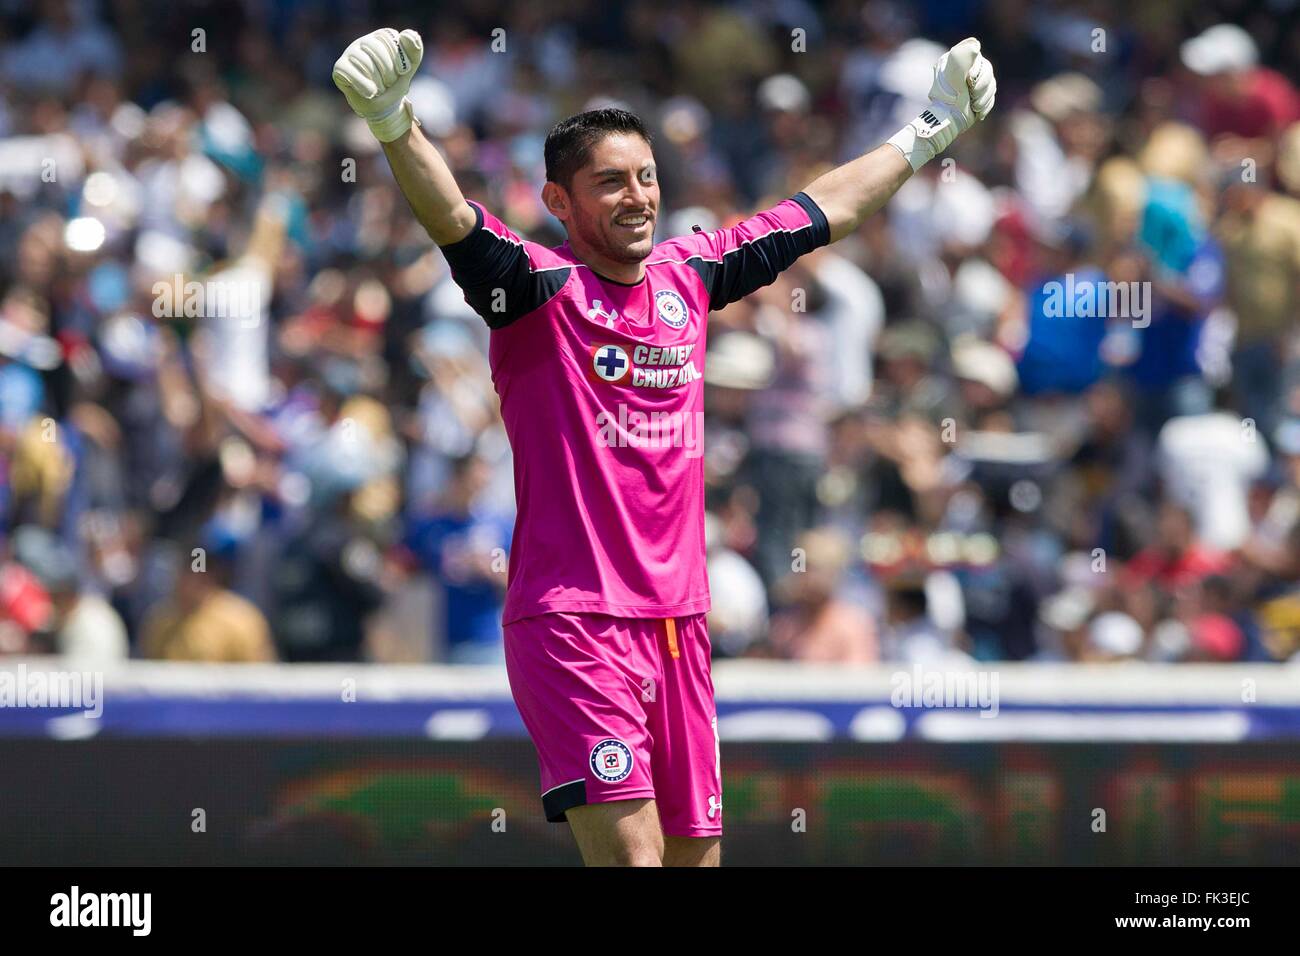 Mexico City, Mexico. 6th Mar, 2016. Cruz Azul's goalkeeper Jesus Corona celebrates a score during the match of Closing Tournament of MX League against UNAM's Pumas at University Olympic Stadium in Mexico City, capital of Mexico, on March 6, 2016. The game ended 2-2. © Alejandro Ayala/Xinhua/Alamy Live News Stock Photo